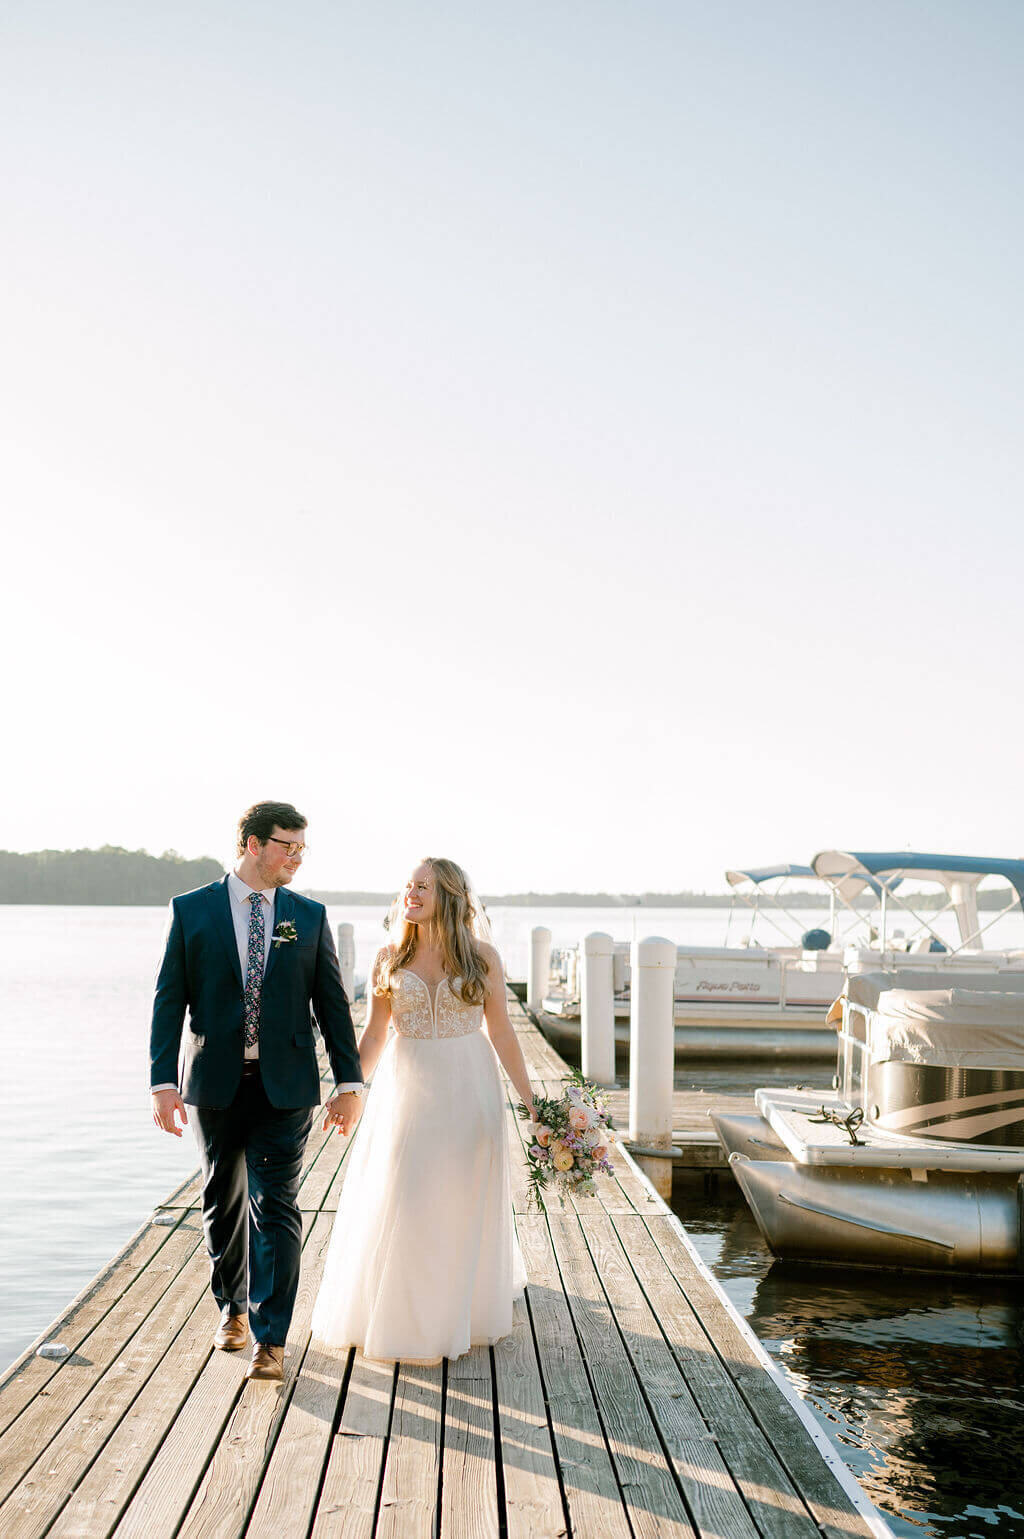 Bride and groom walking along a pier located on the Potomac River